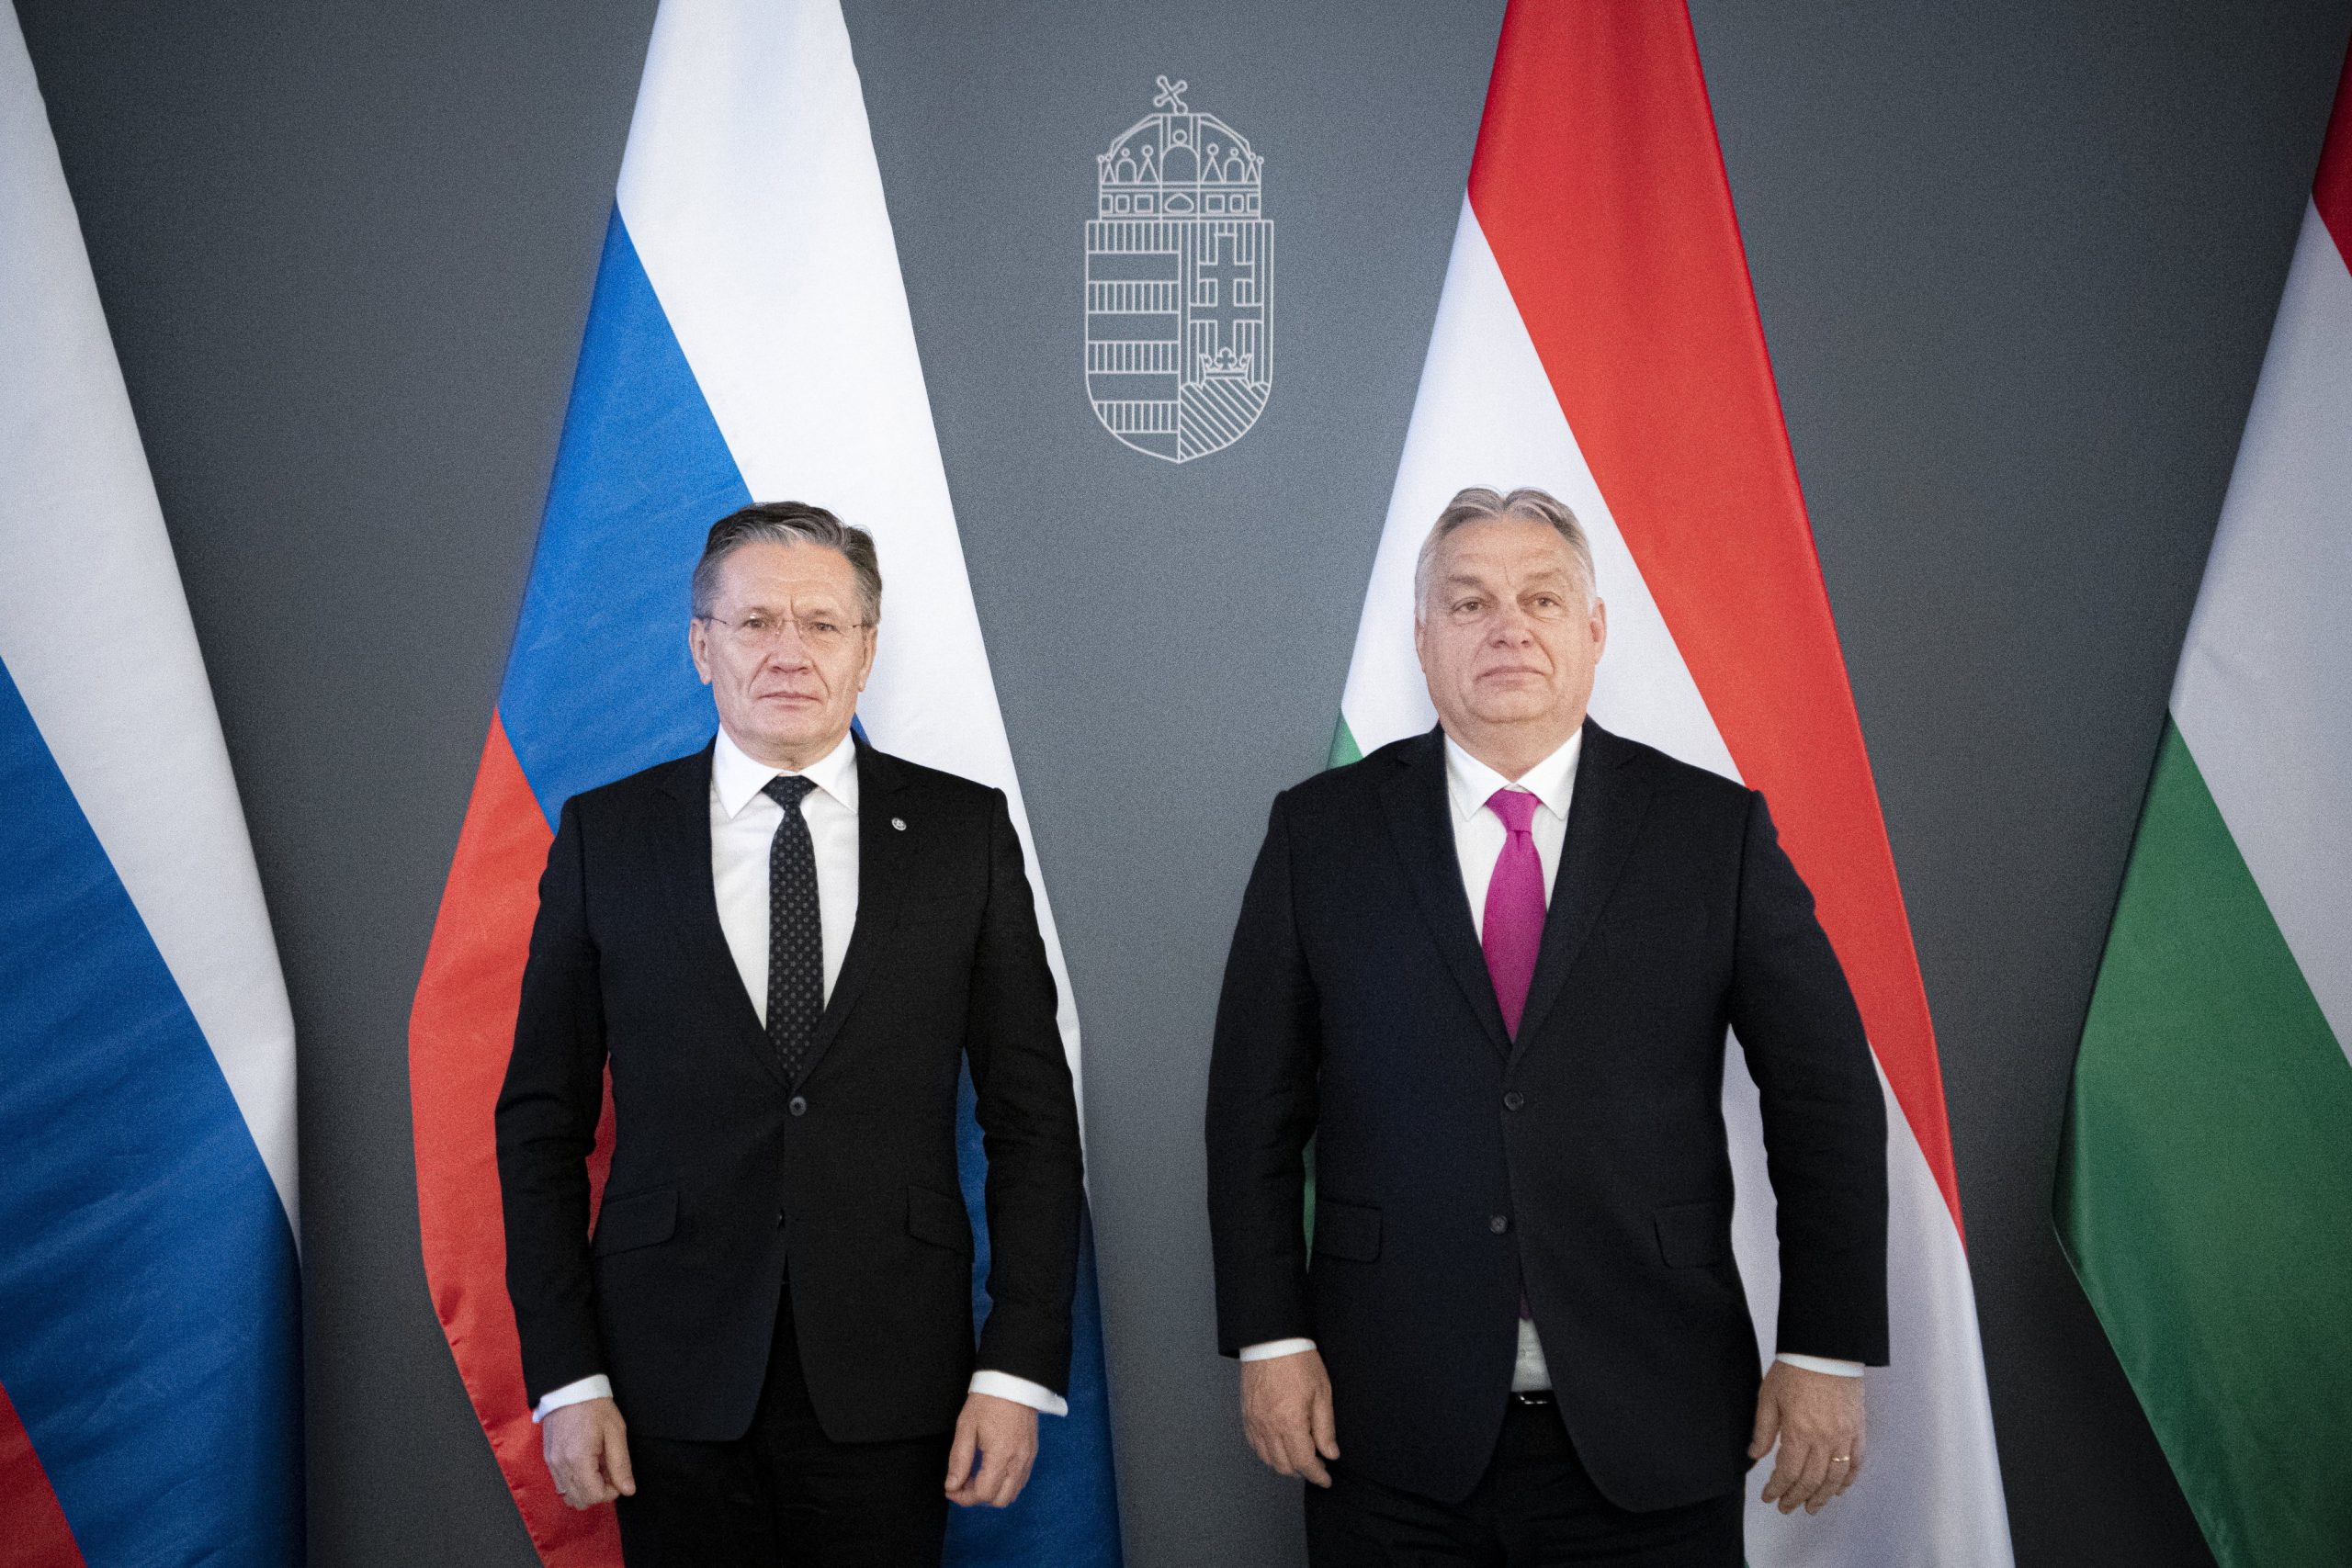 PM Orbán Discusses Paks Nuclear Plant Upgrade with Rosatom CEO